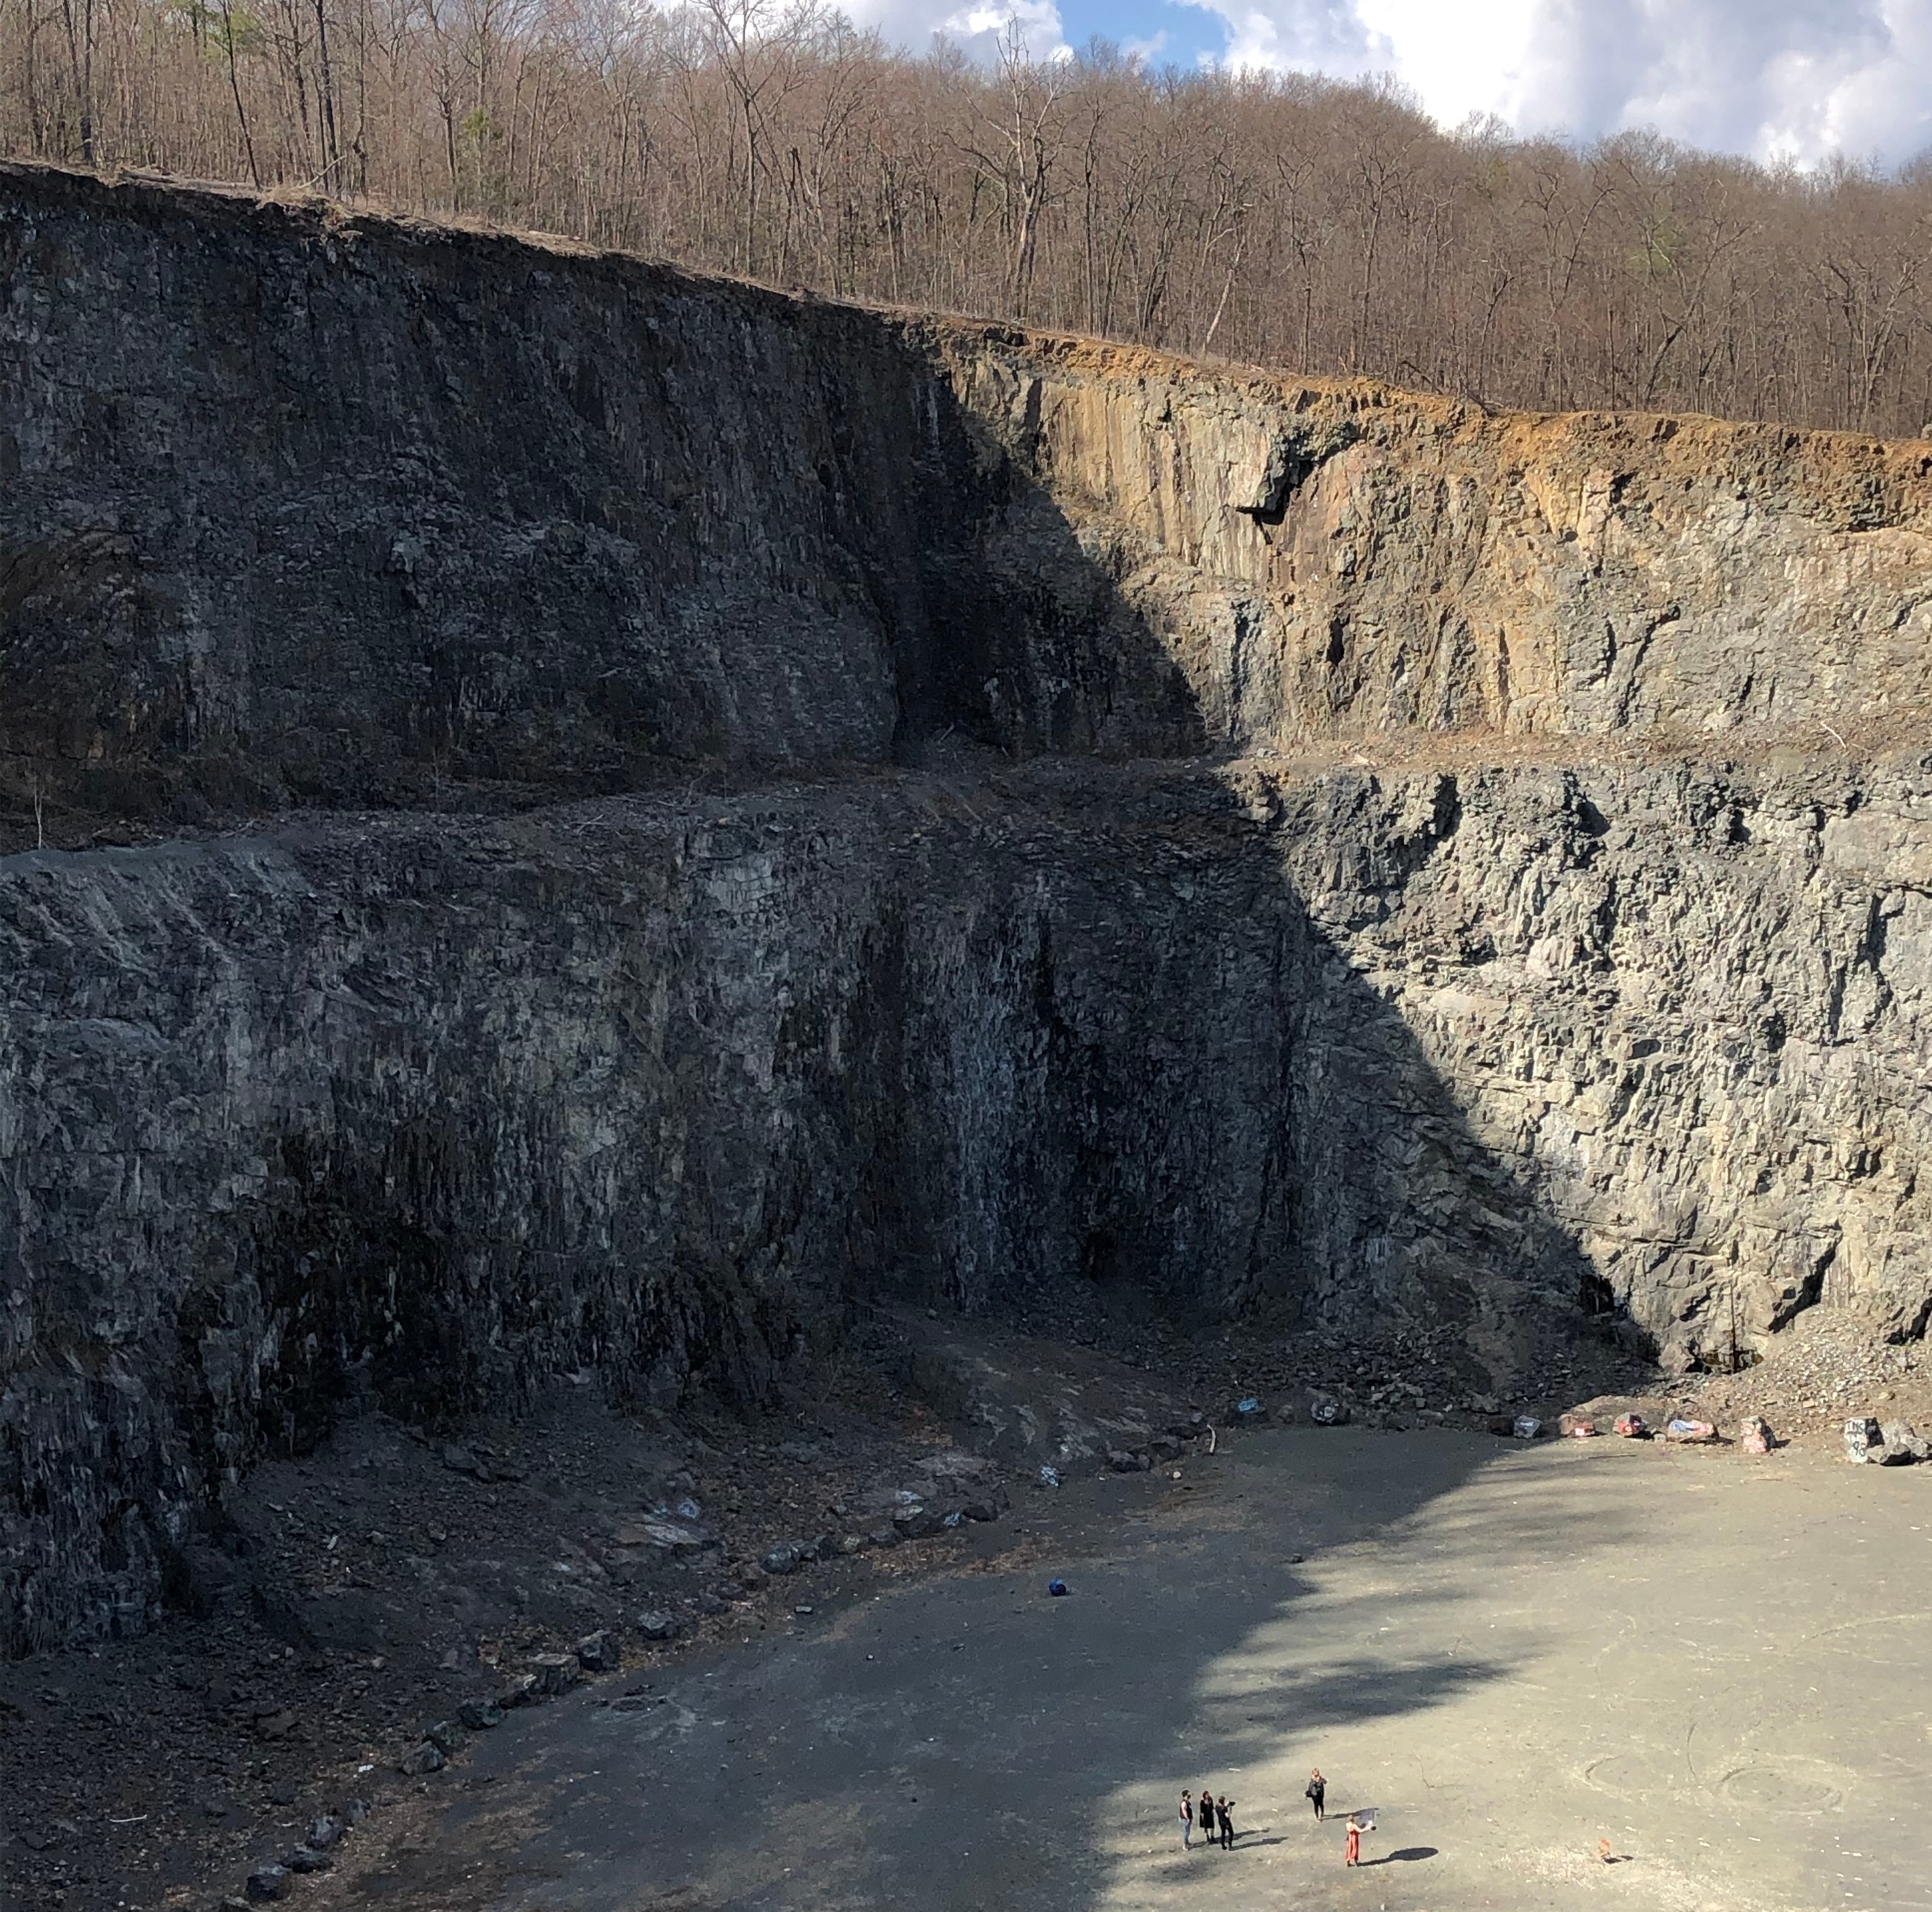 People use the bottom of the Mt. Tom quarry as the setting for a photo shoot.